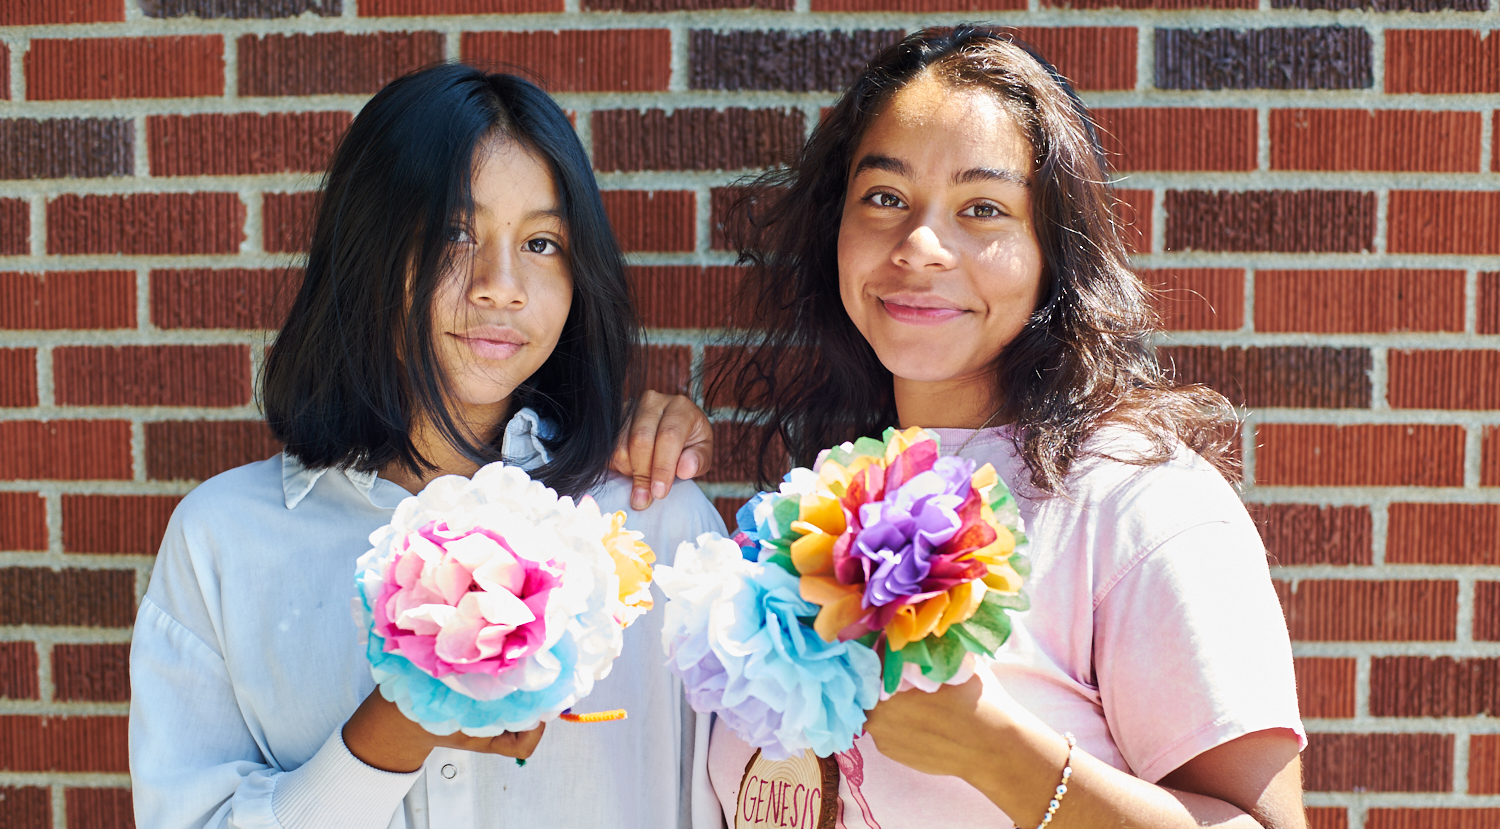 Students at Adelante Mujeres' summer learning program in 2021. Photo by Sarah Arnoff Yeoman.